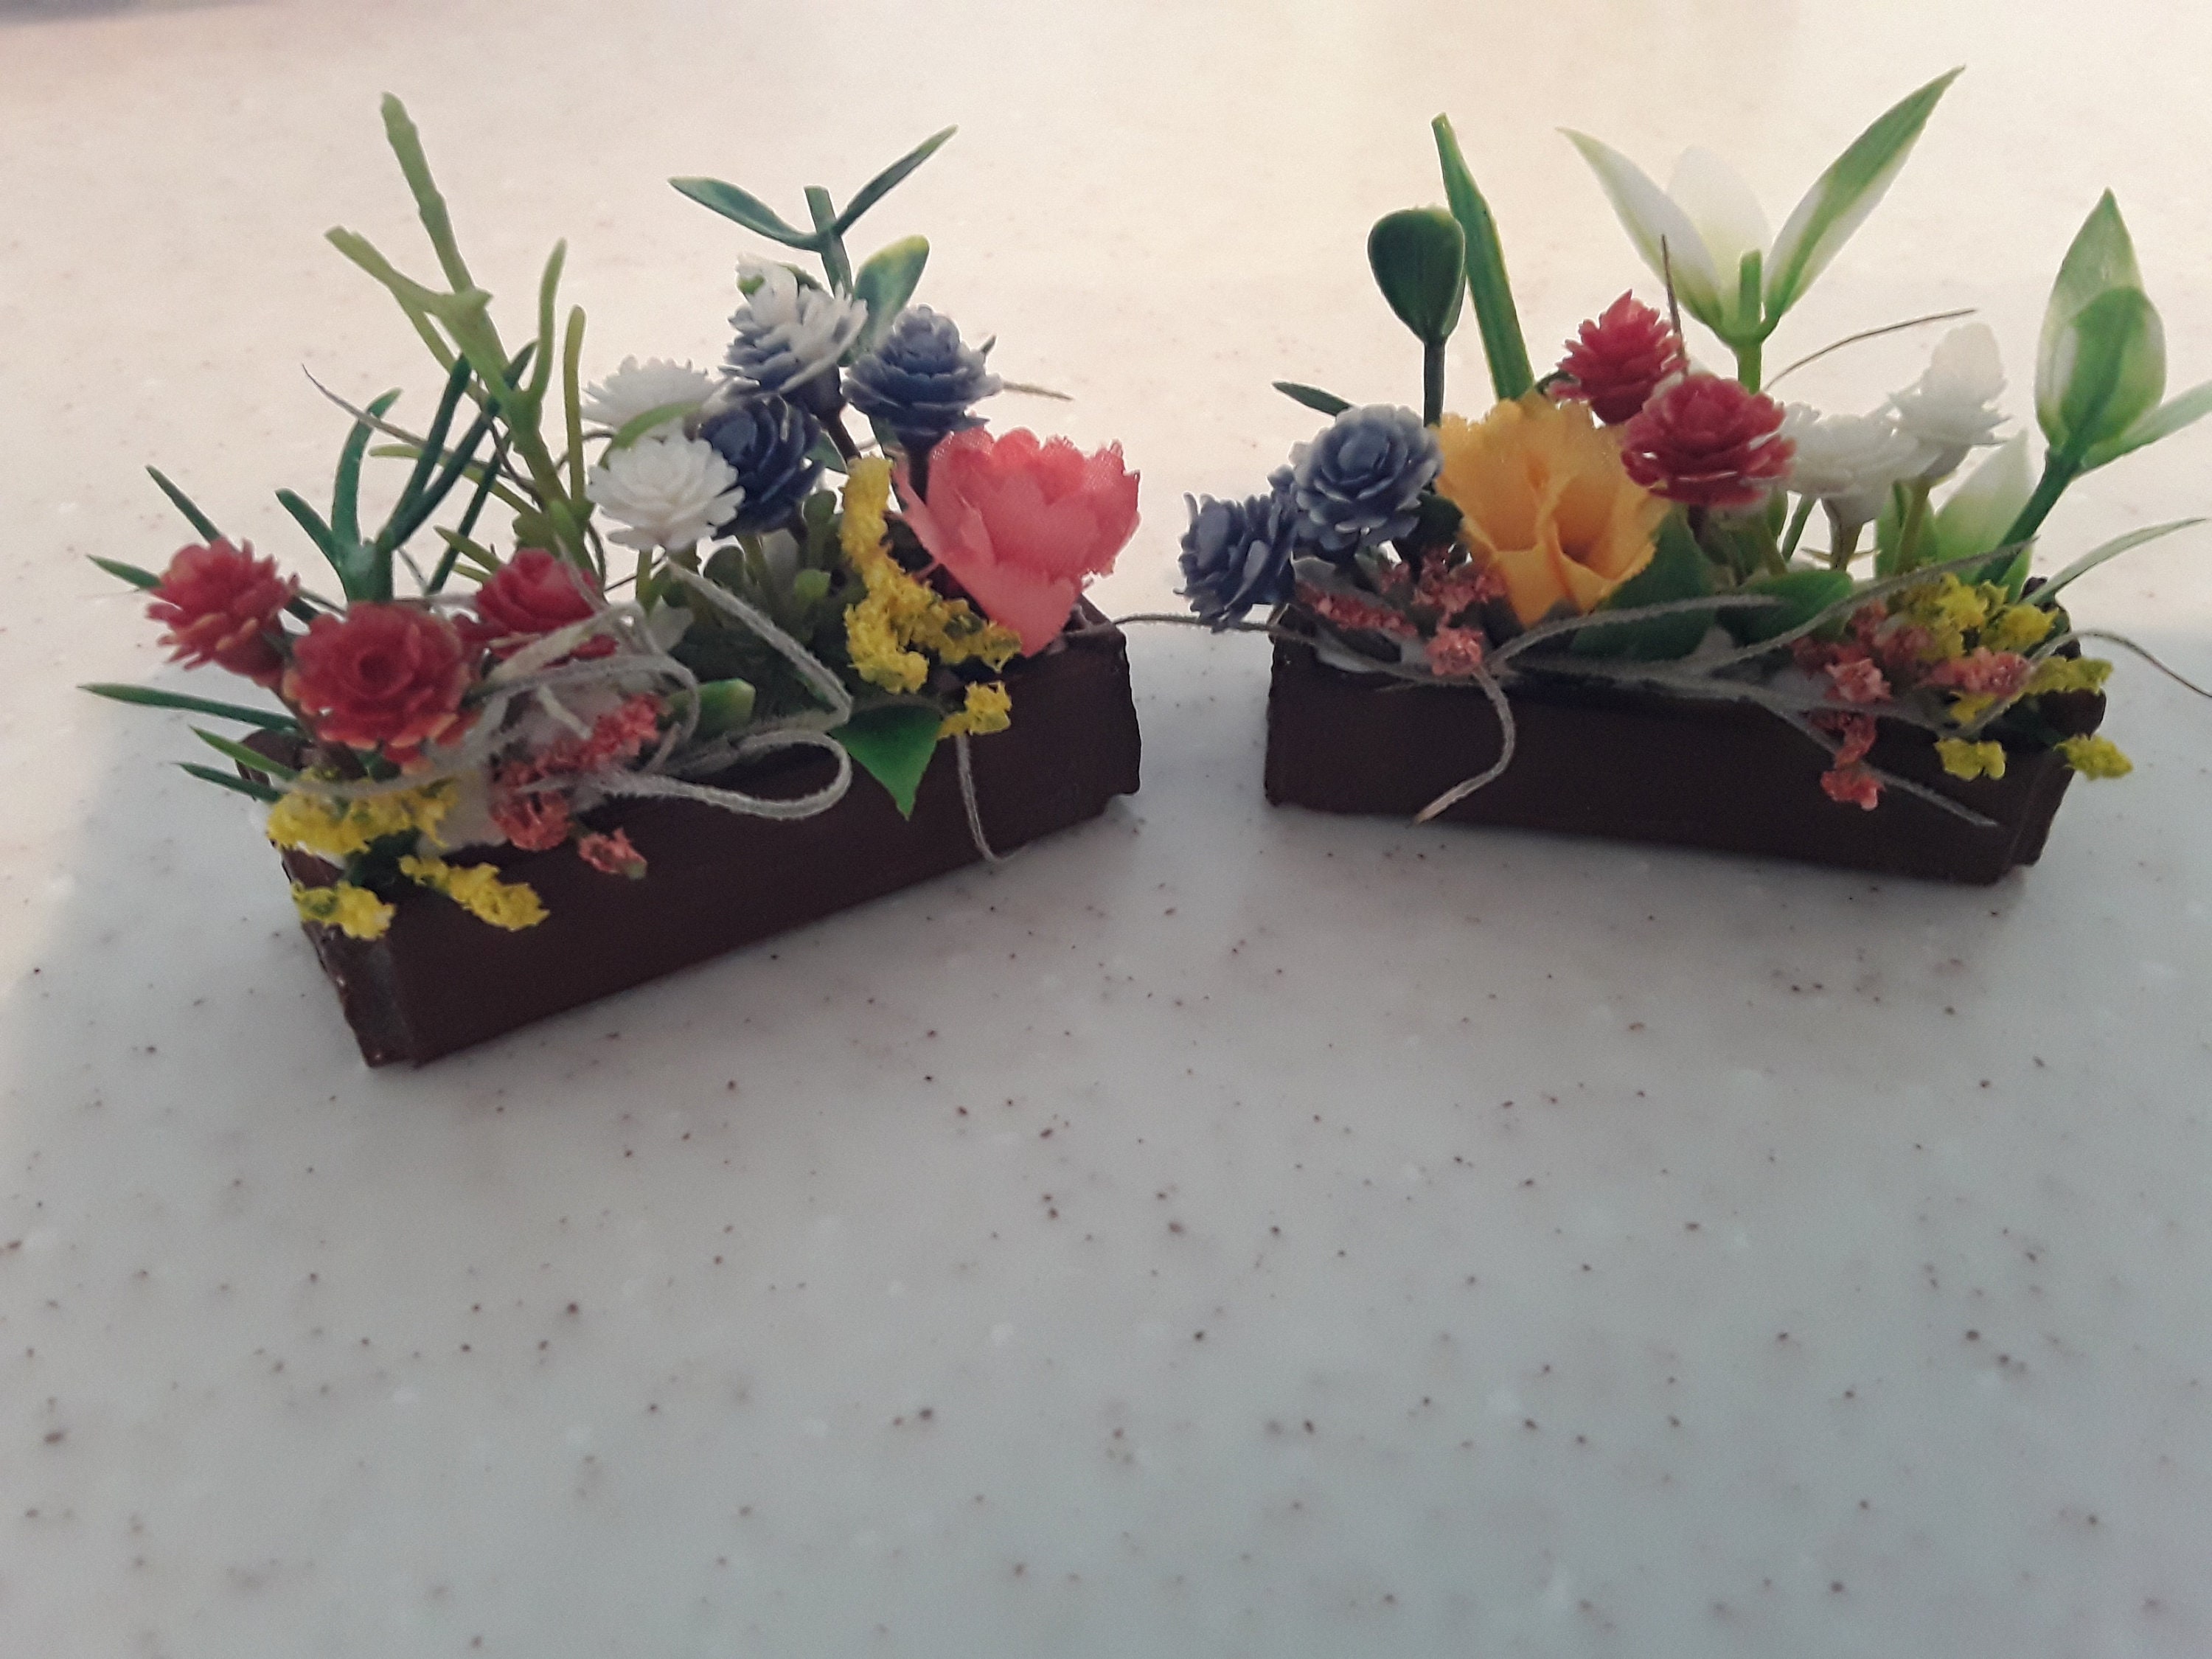 Set 5 Assorted Dollhouse Miniature Flowers,Tiny Flowers in Ceramic Pot with  Planter Box, Dollhouse Accessories for Collectibles